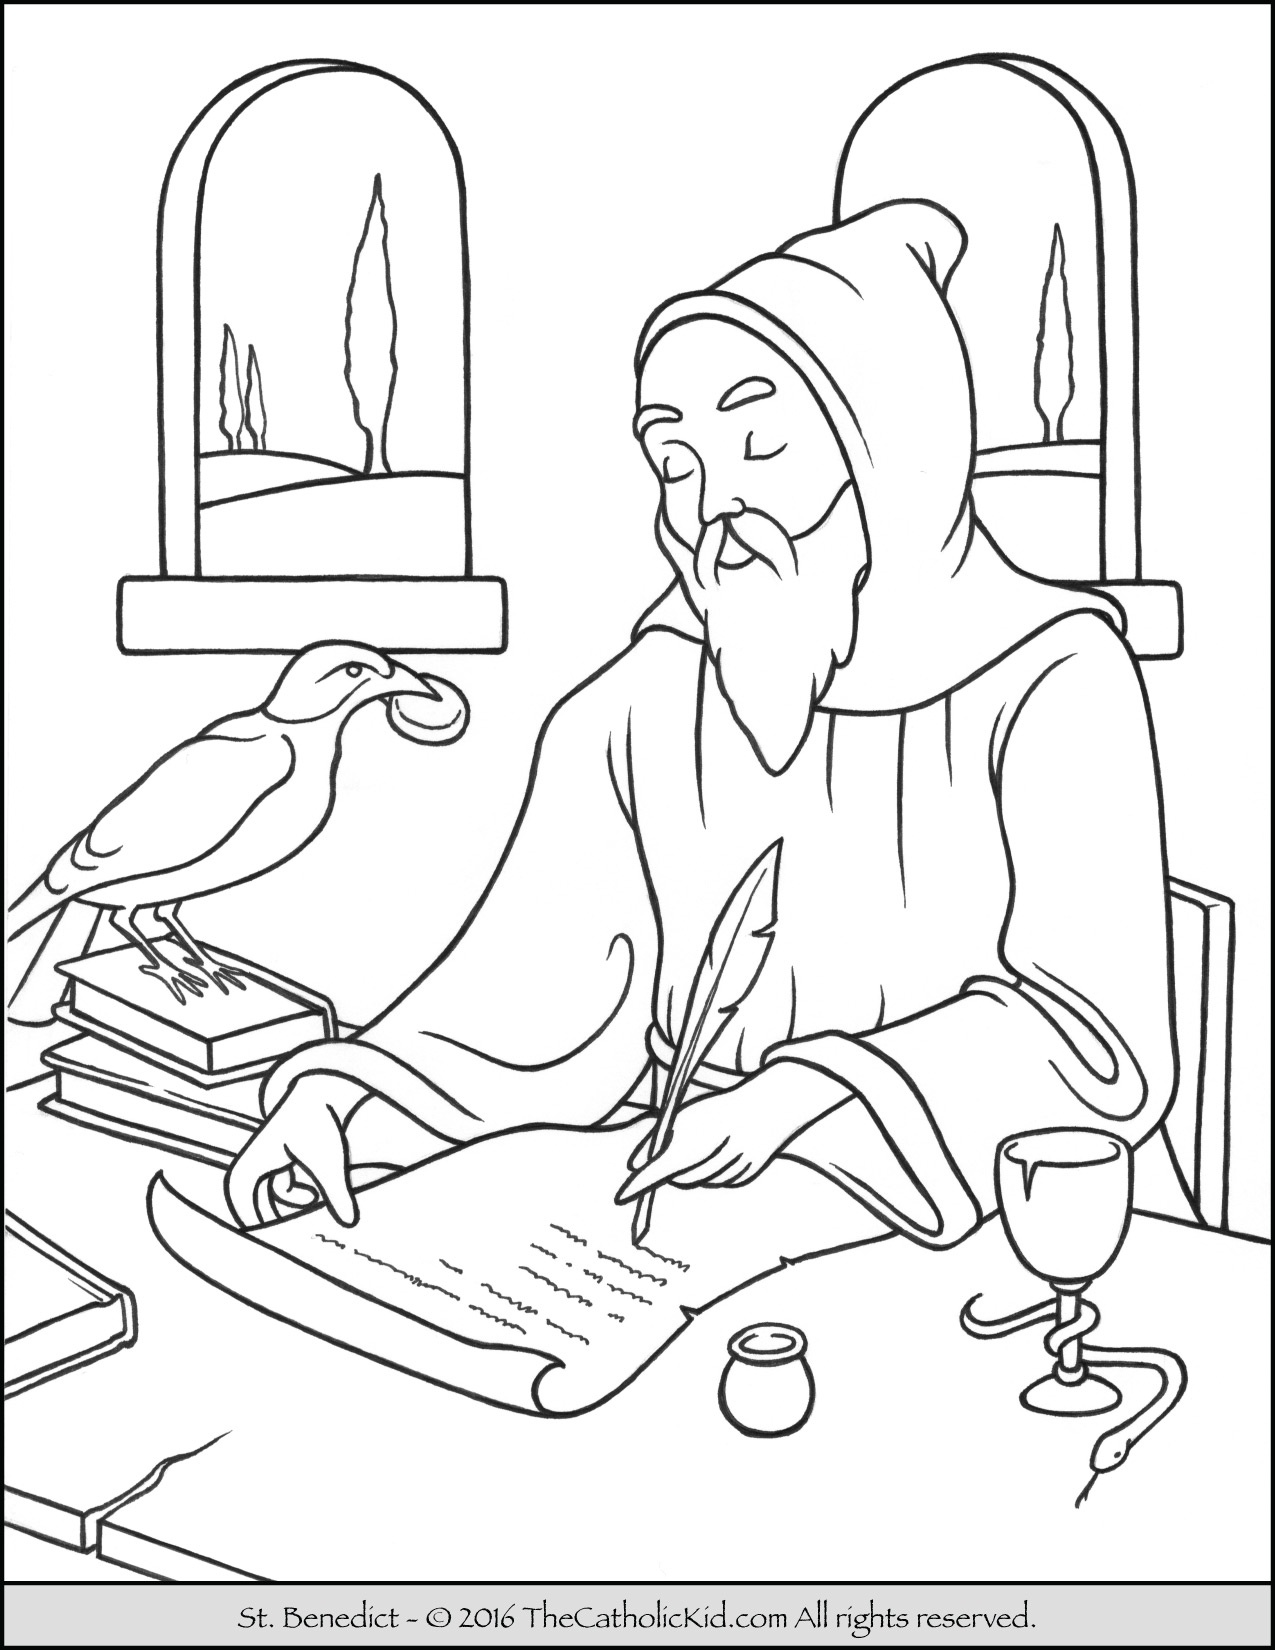 Are You My Mother Coloring Pages at GetColorings.com | Free printable